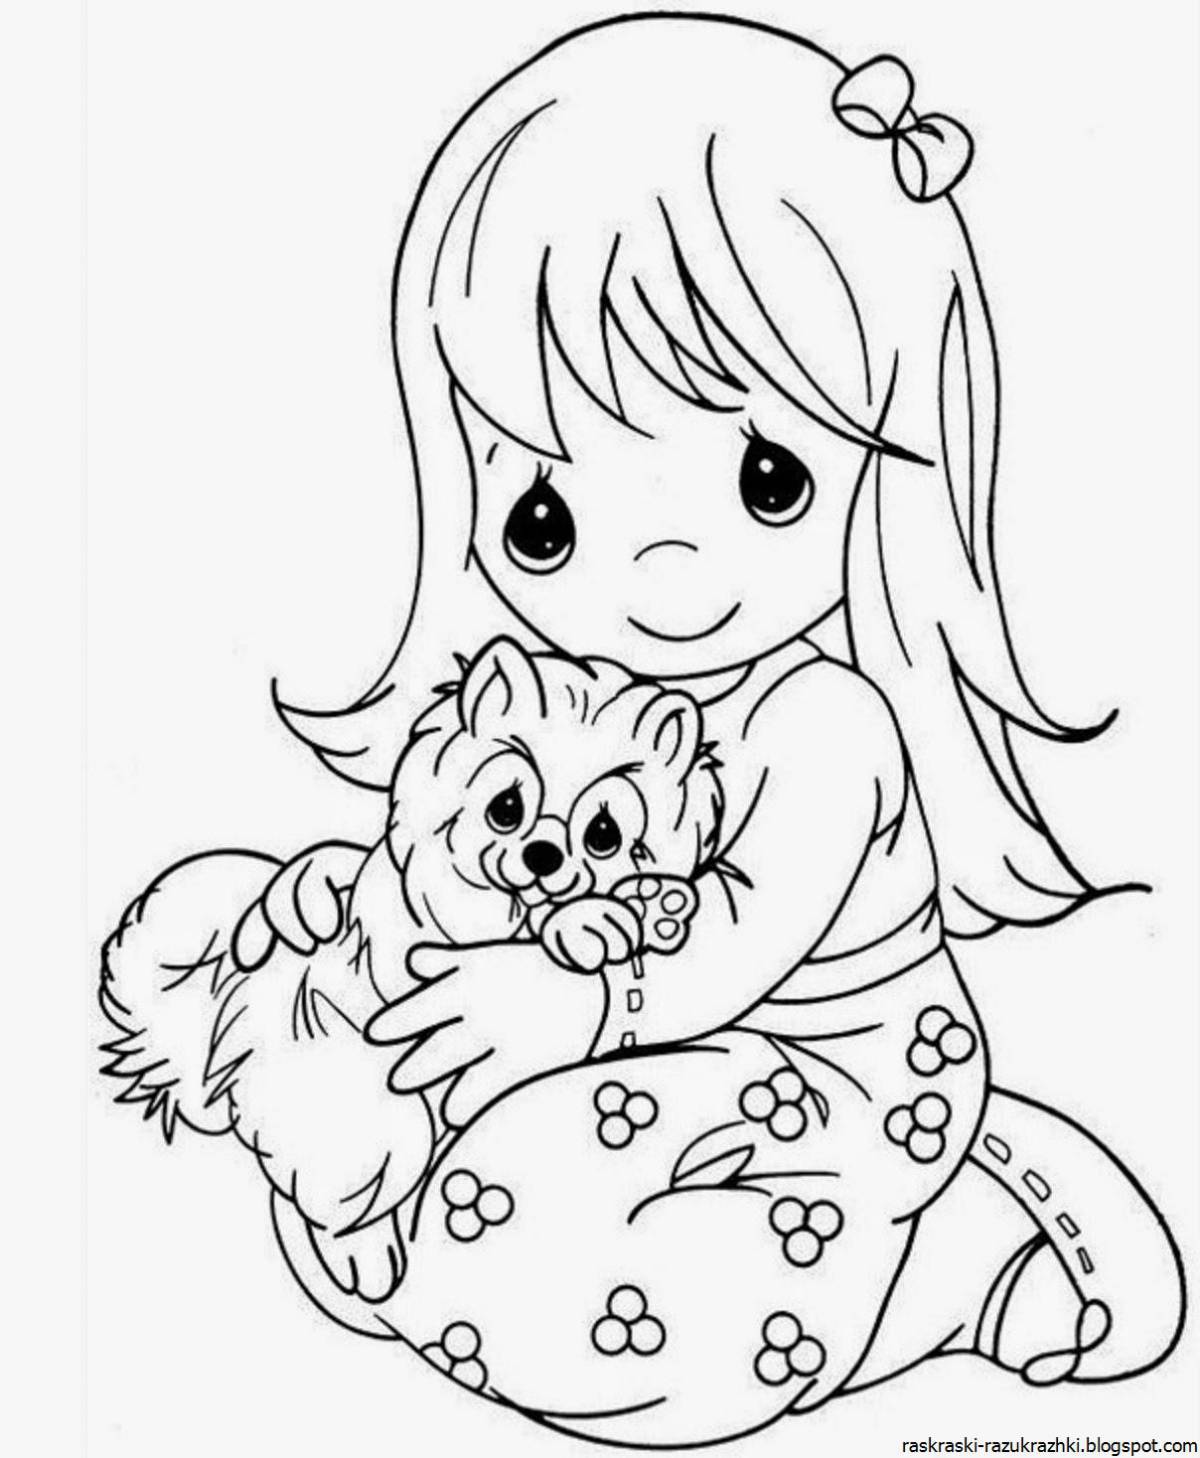 Coloring pages for girls 7 years old